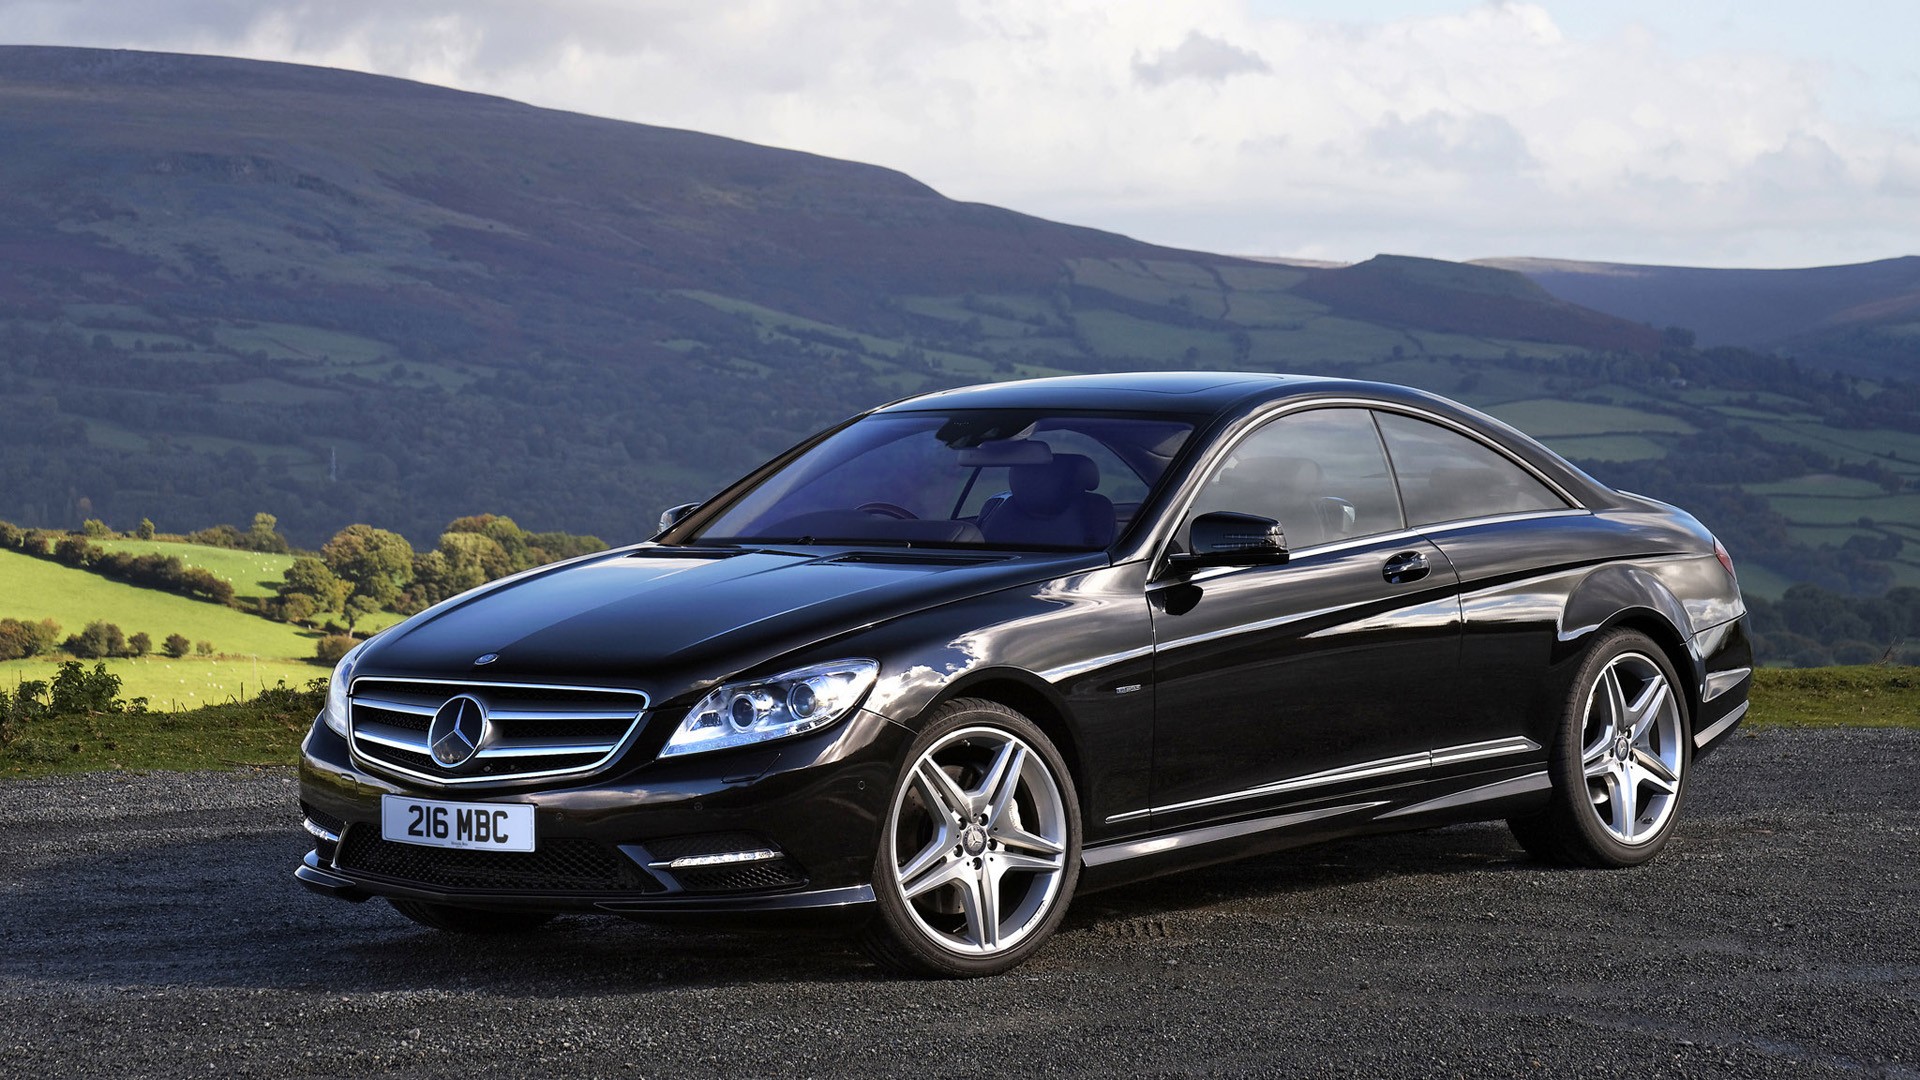 Mercedes Cl-class Motorpedia ALL models, history and specifications